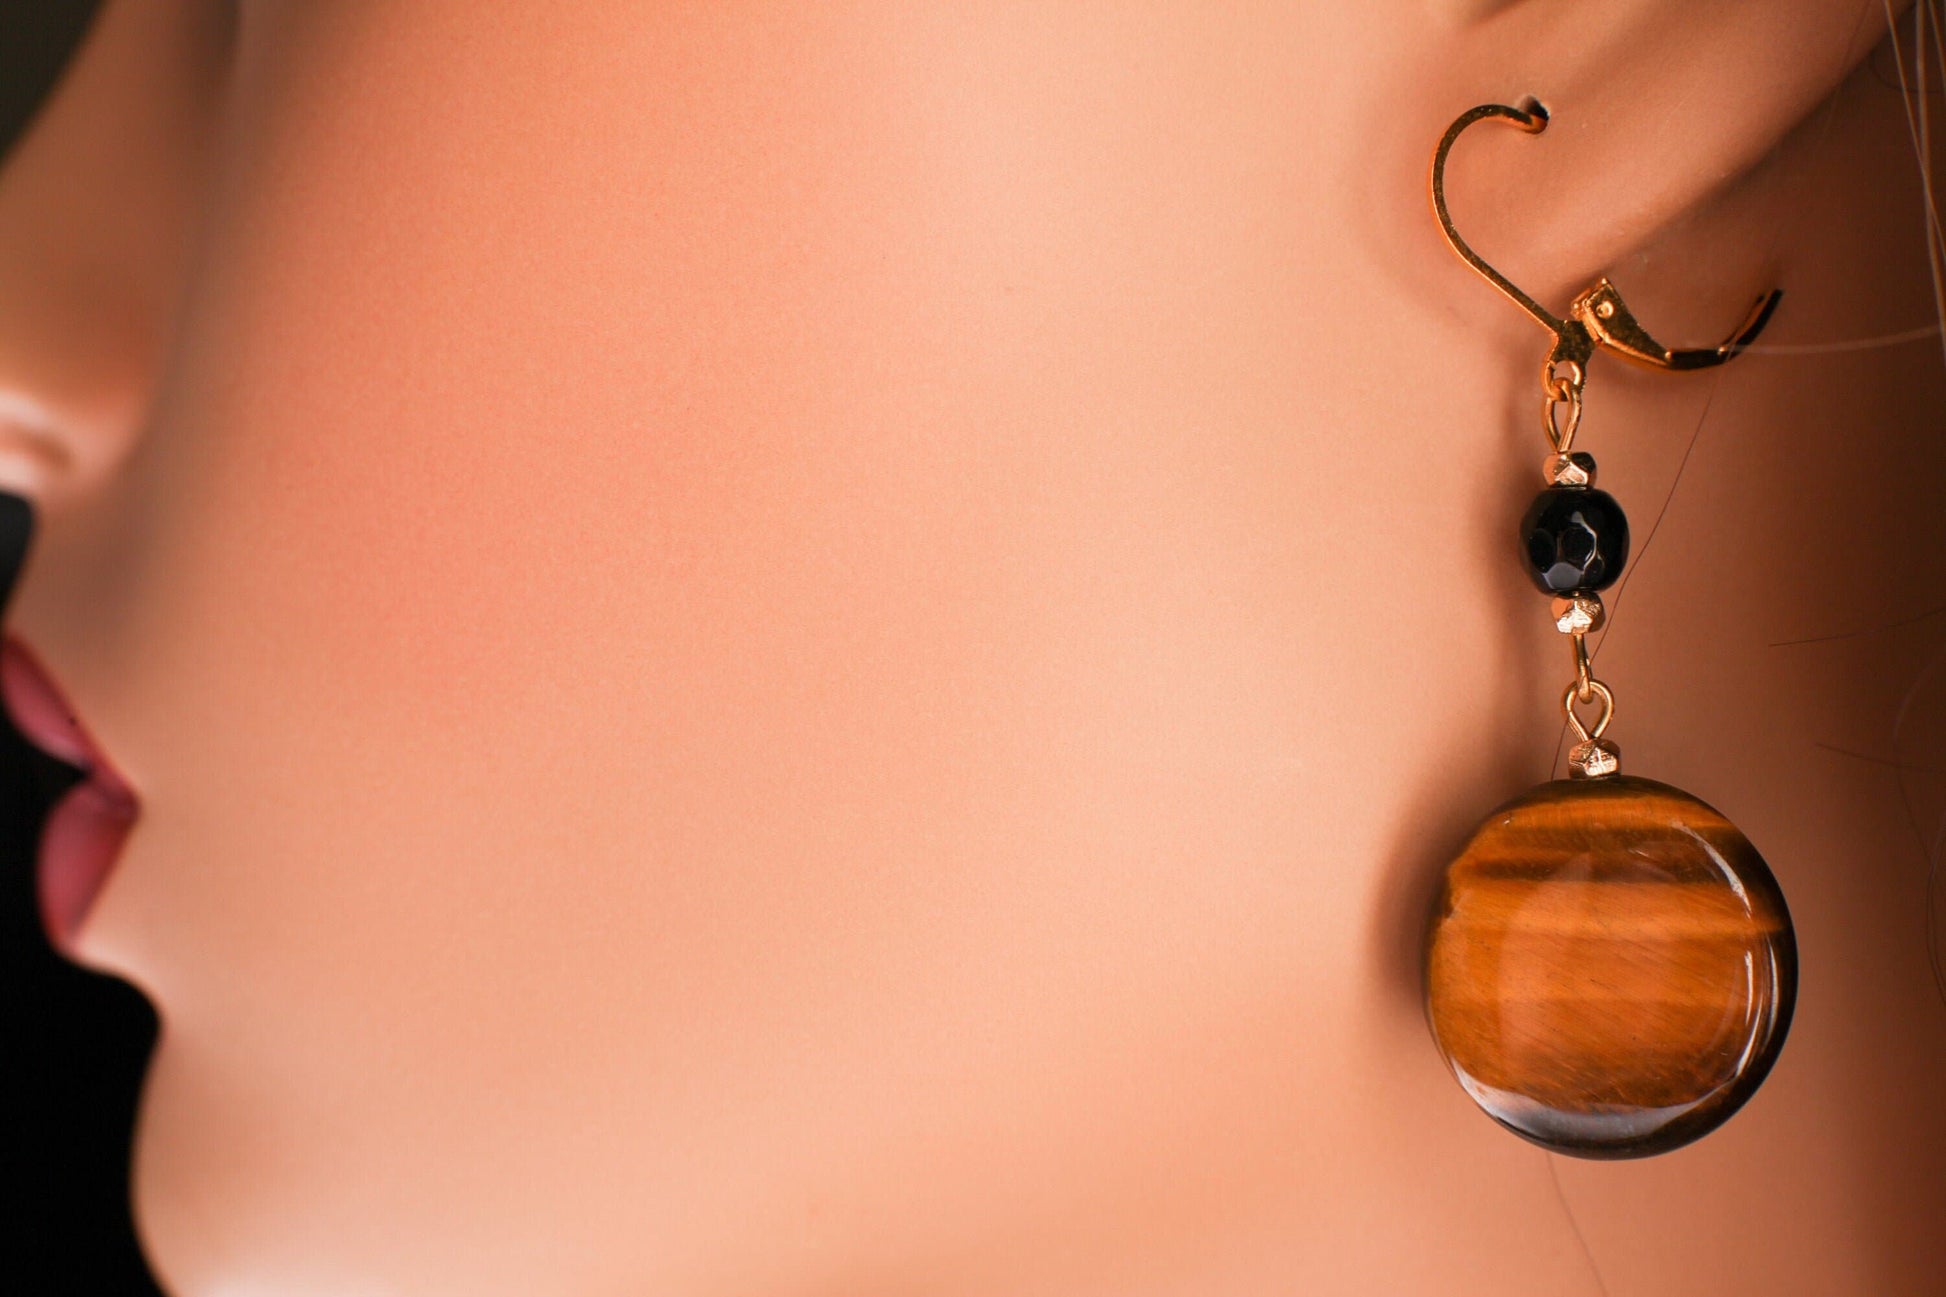 Tiger Eye Disk 20mm with Dangling Black Onyx Spacer Beads in Gold Leverback Earrings